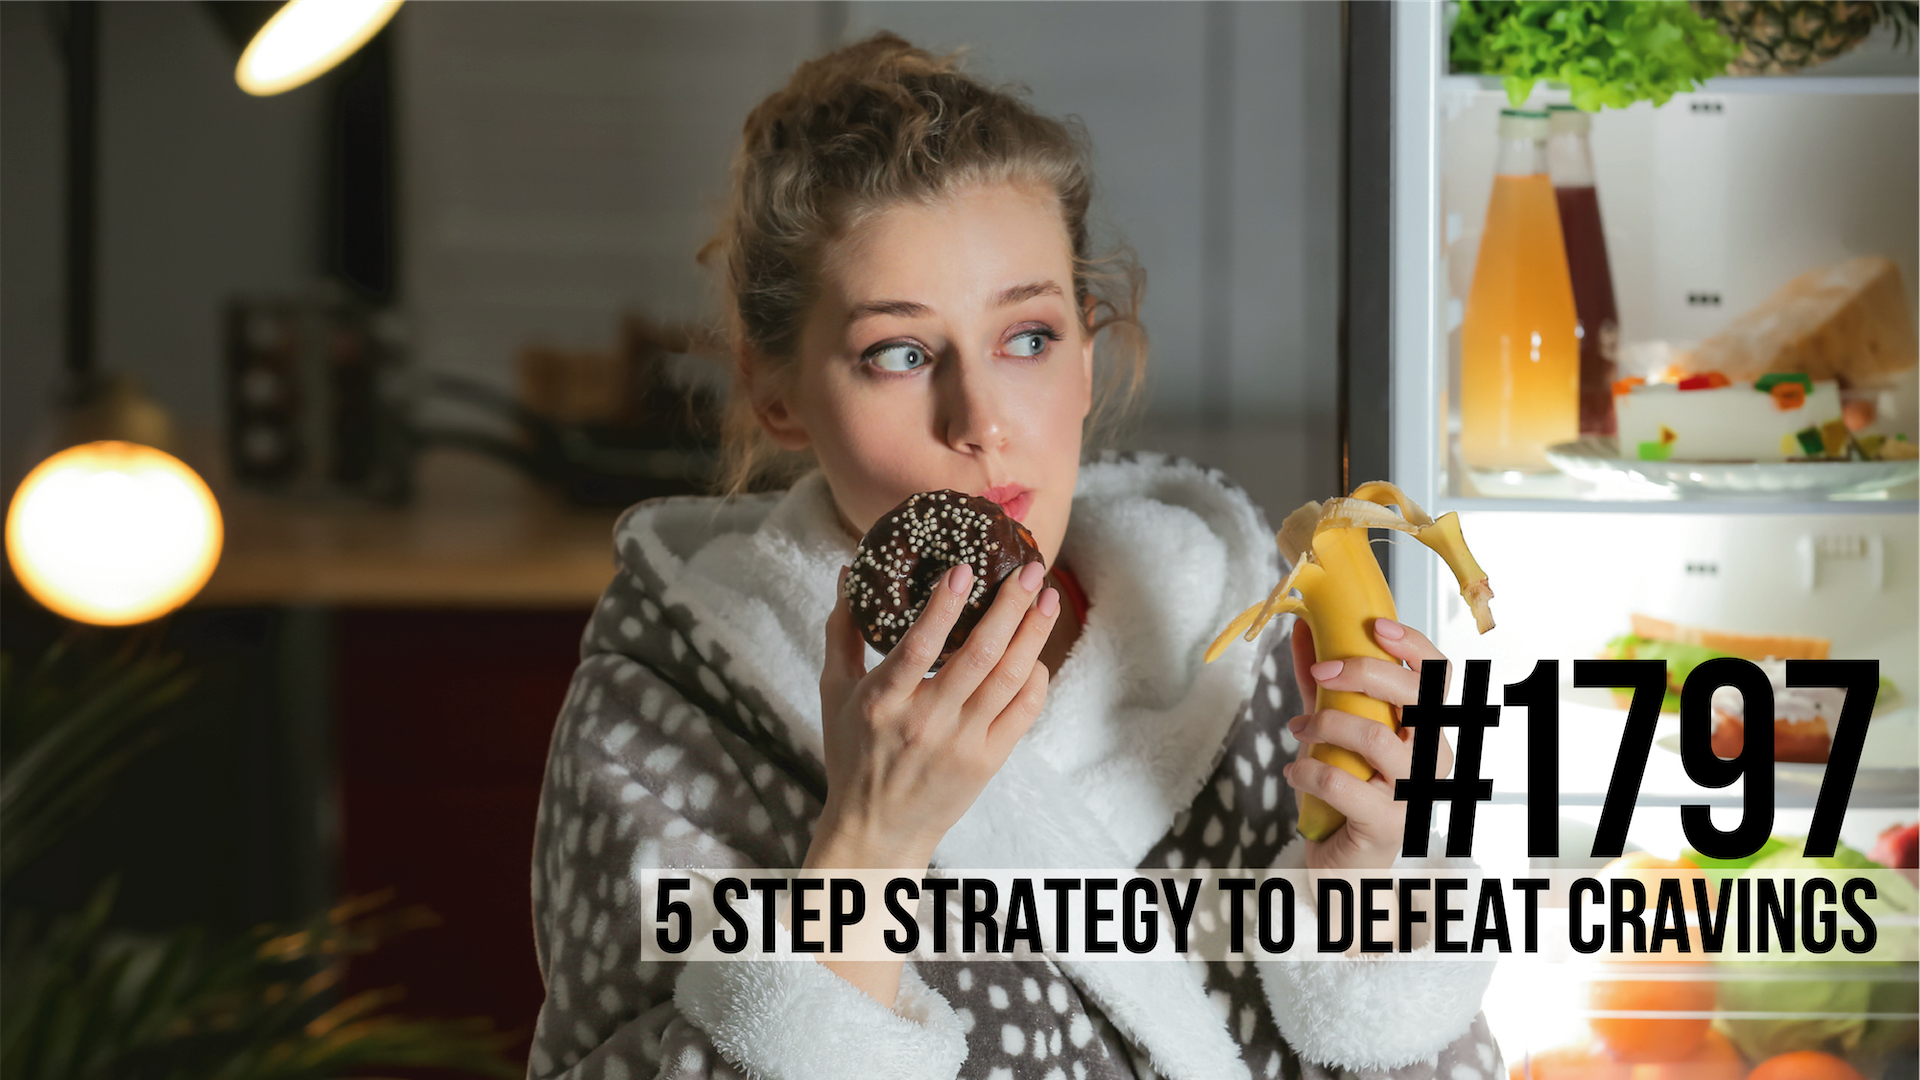 1797: The 5 Step Strategy to Defeat Cravings